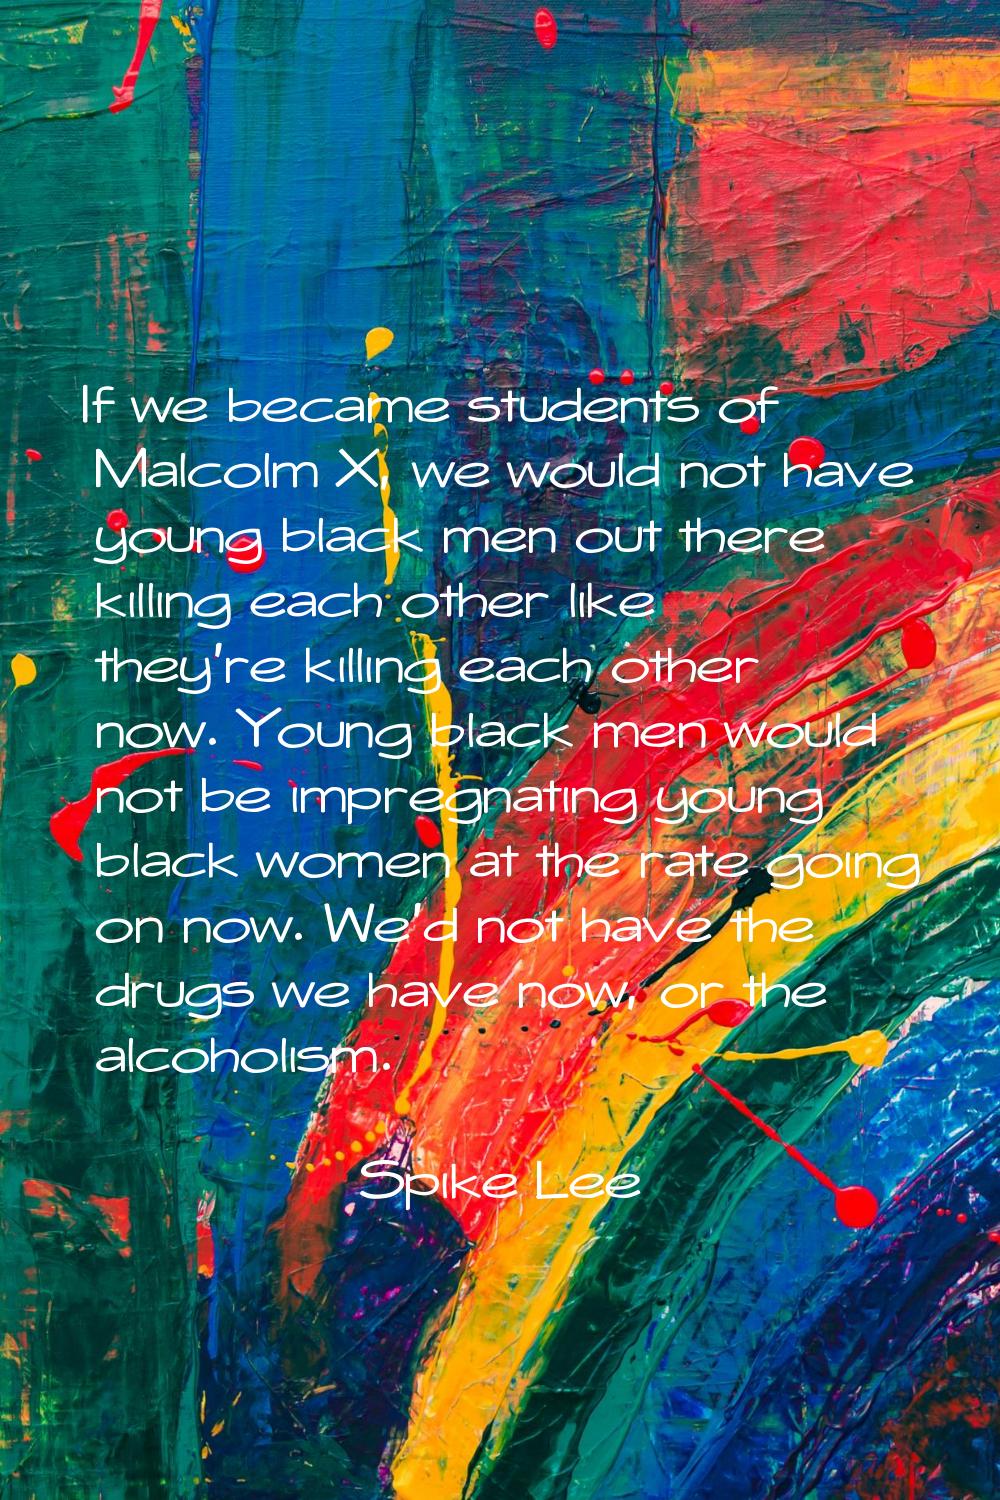 If we became students of Malcolm X, we would not have young black men out there killing each other 